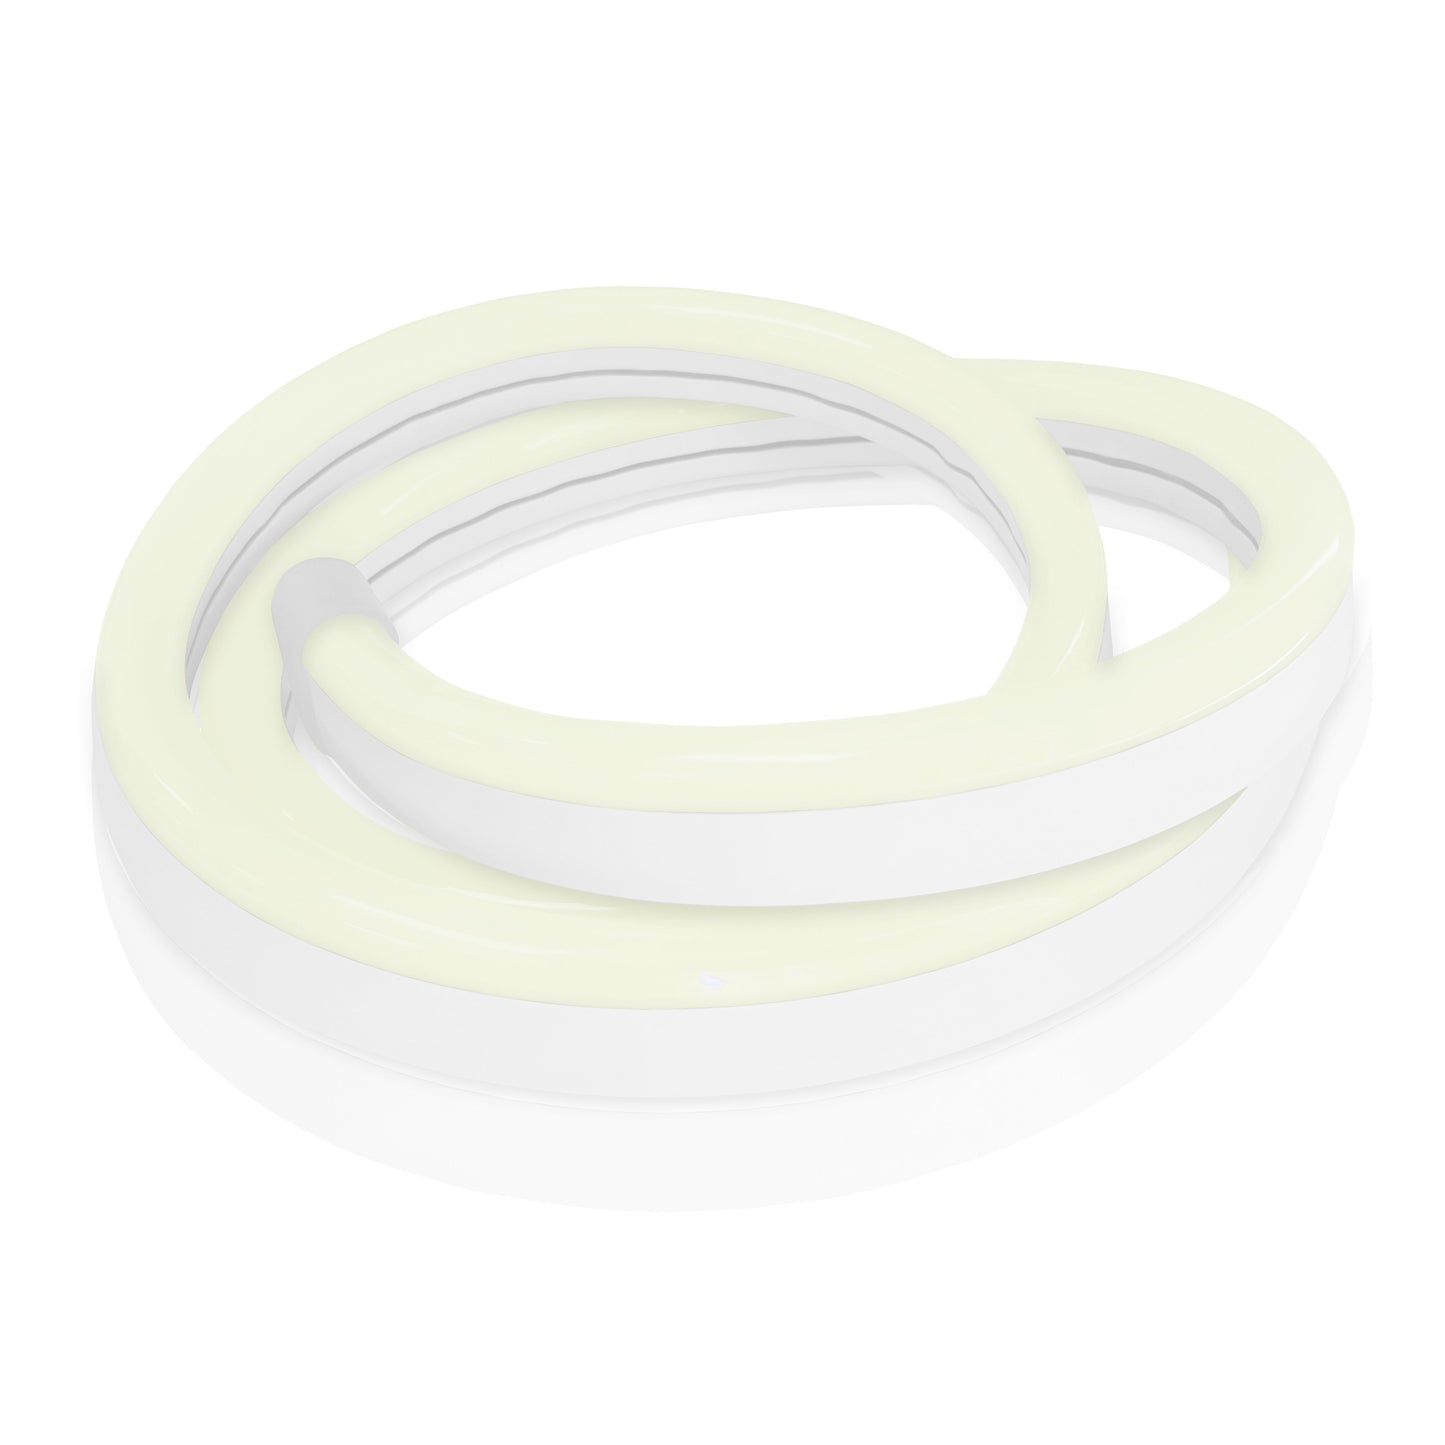 Load image into Gallery viewer, loosely coiled white neon led strip
